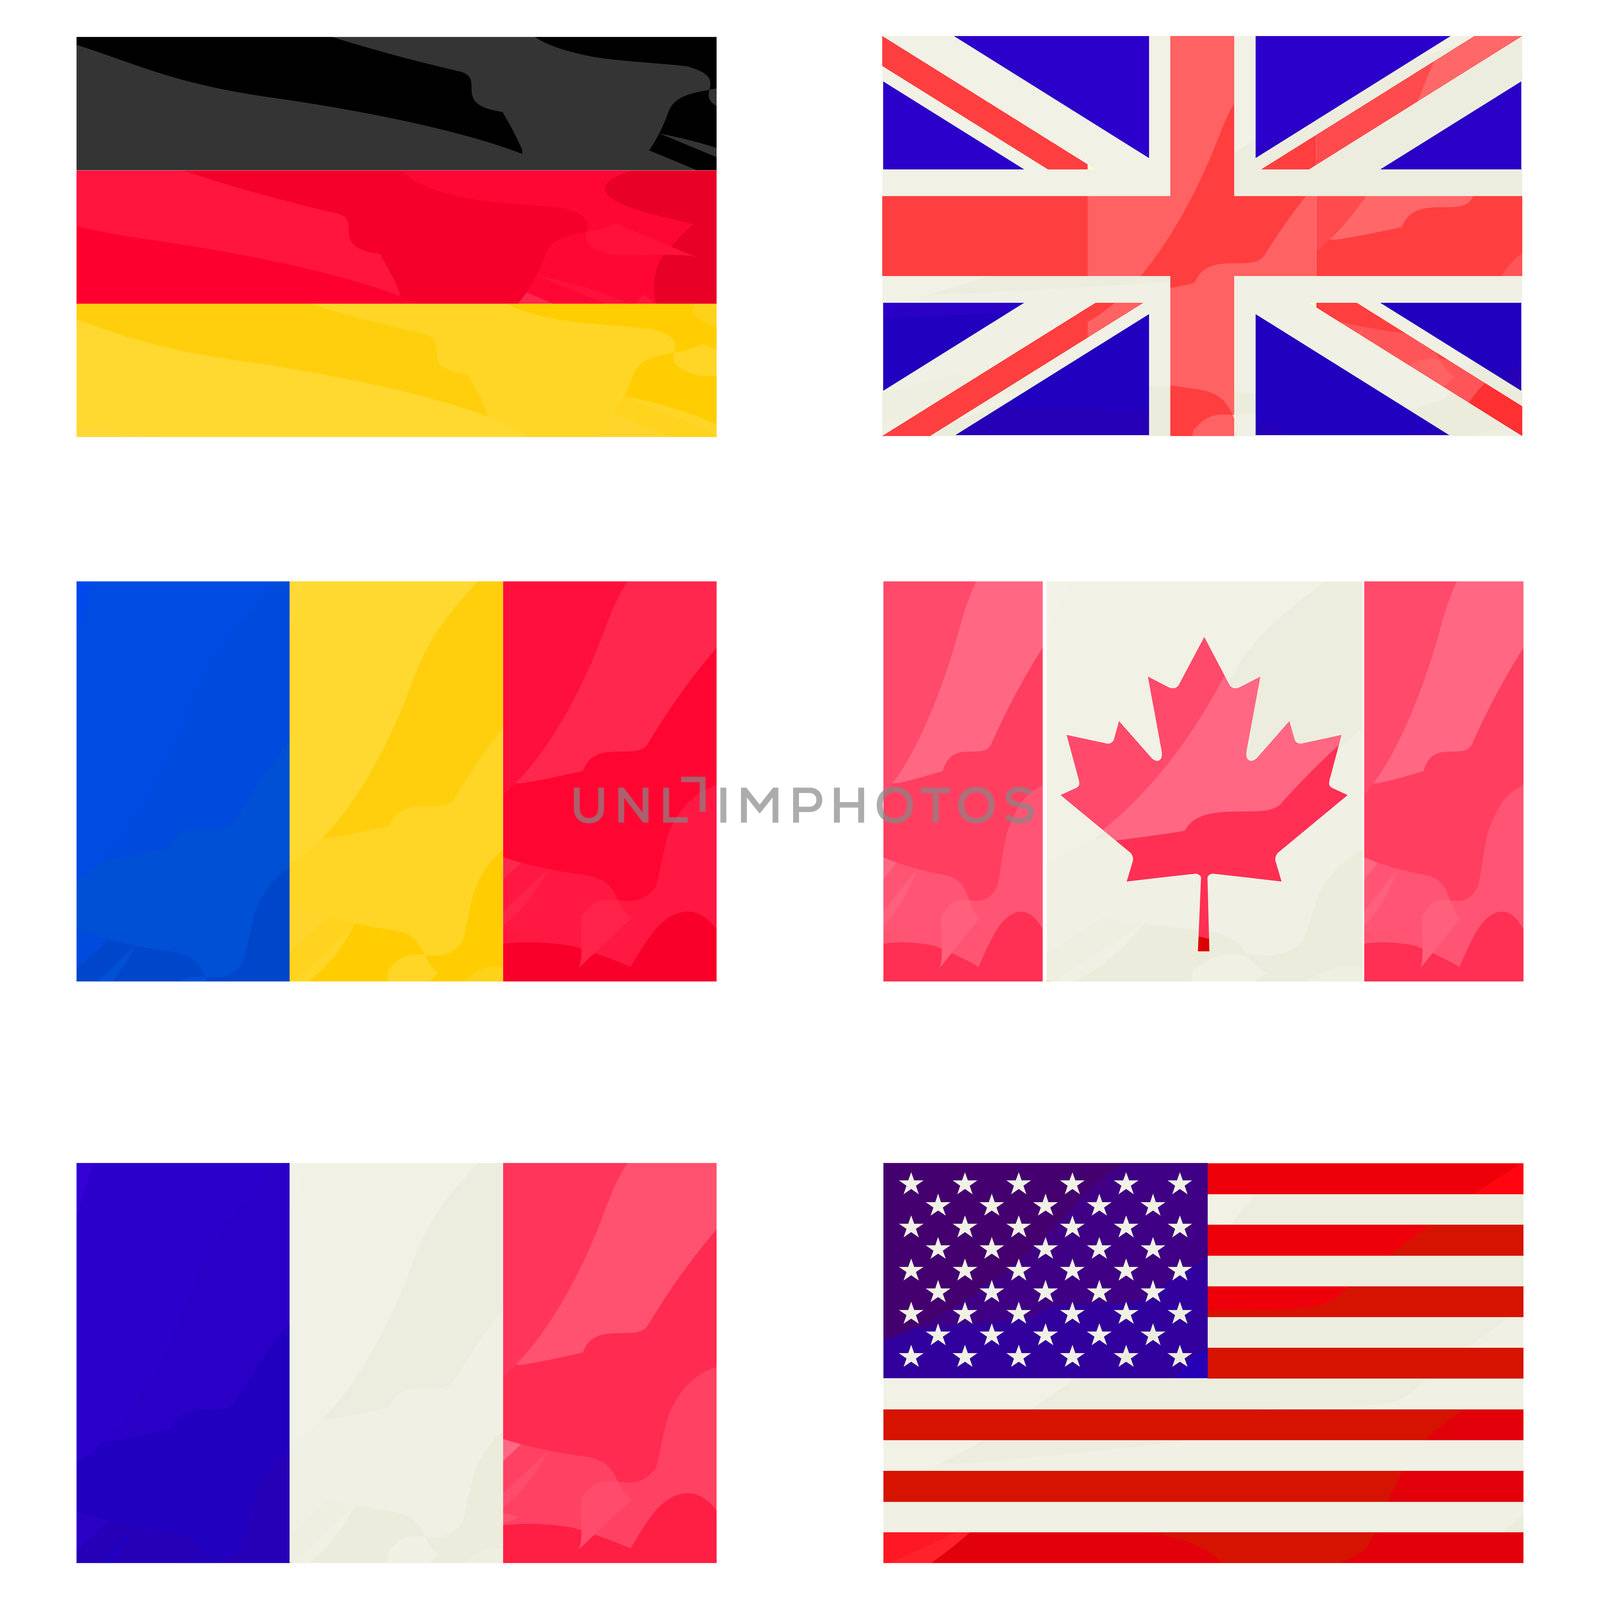 Stylized flags collection by Lirch